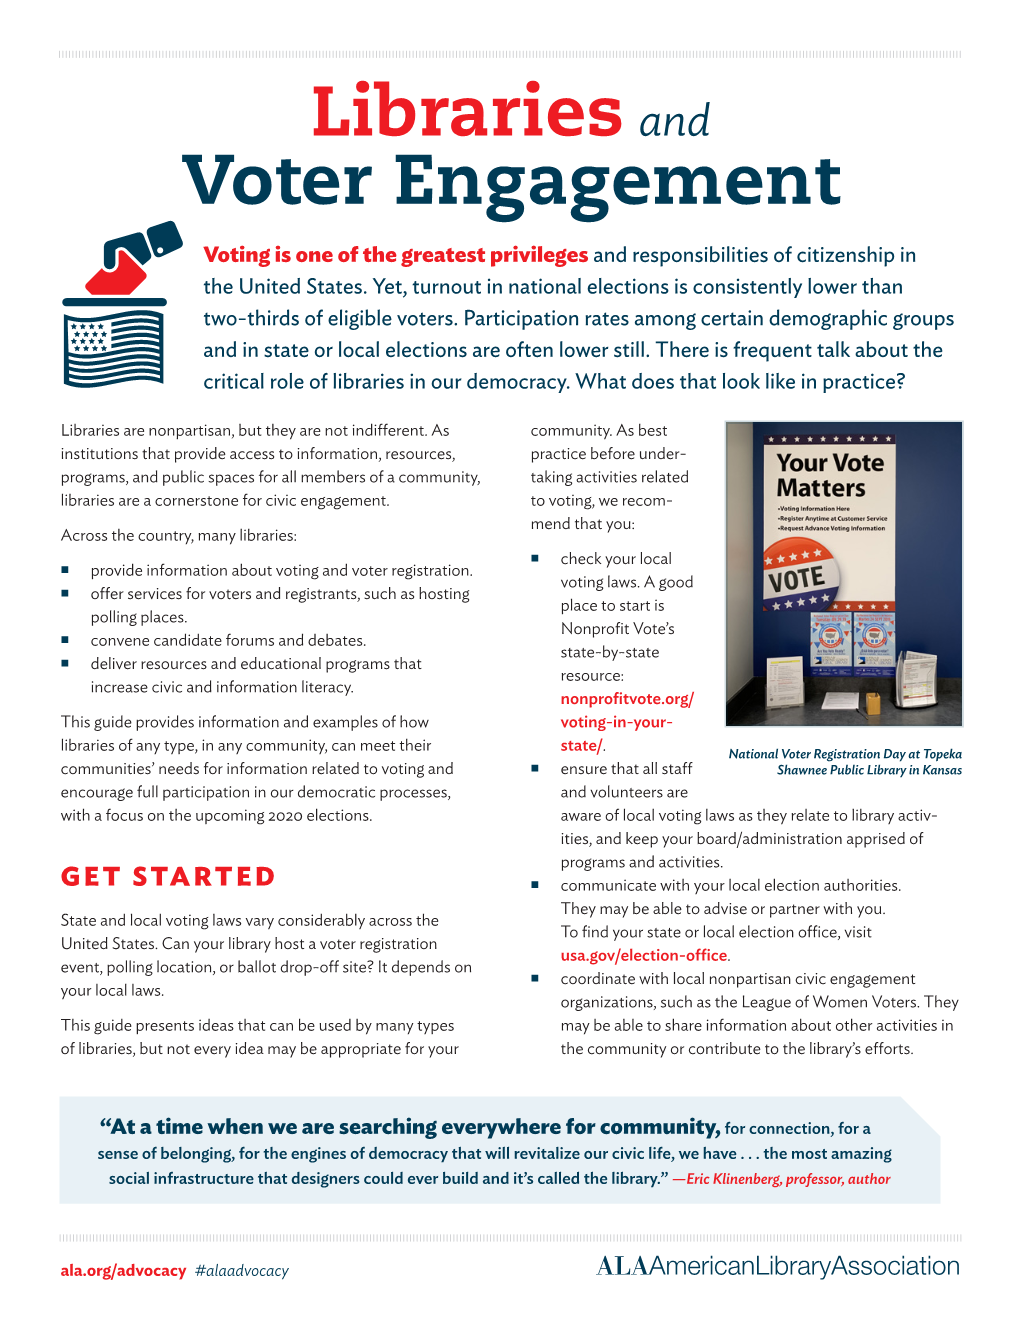 Libraries and Voter Engagement